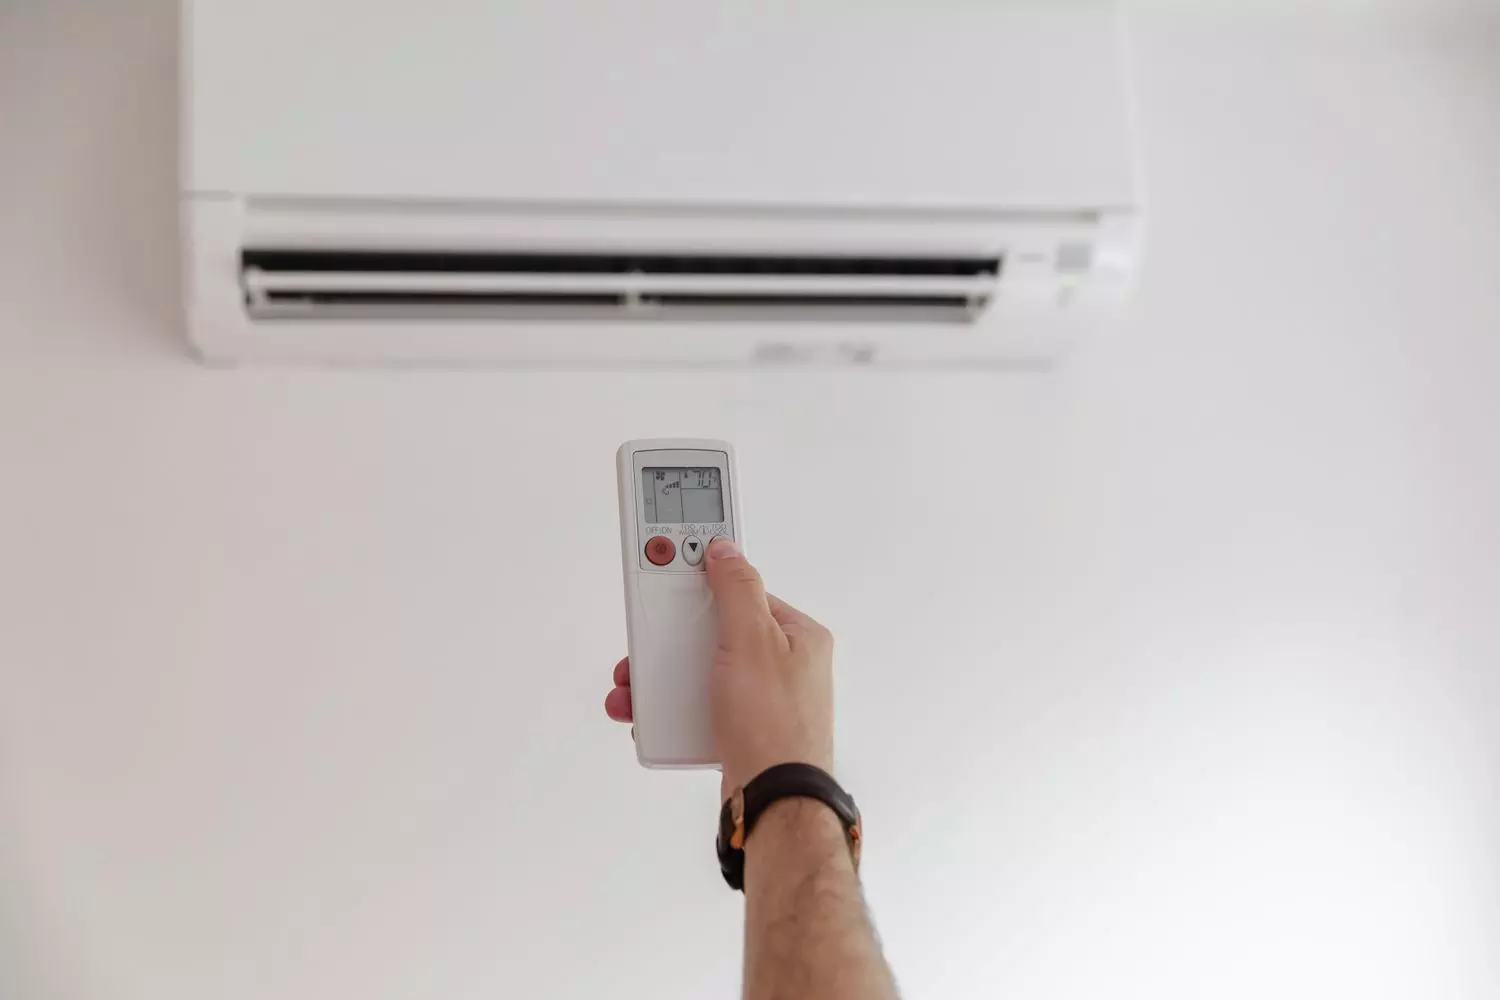 Be Cautious with AC Use: It Can Raise Your Electricity Bill and Harm Your Health